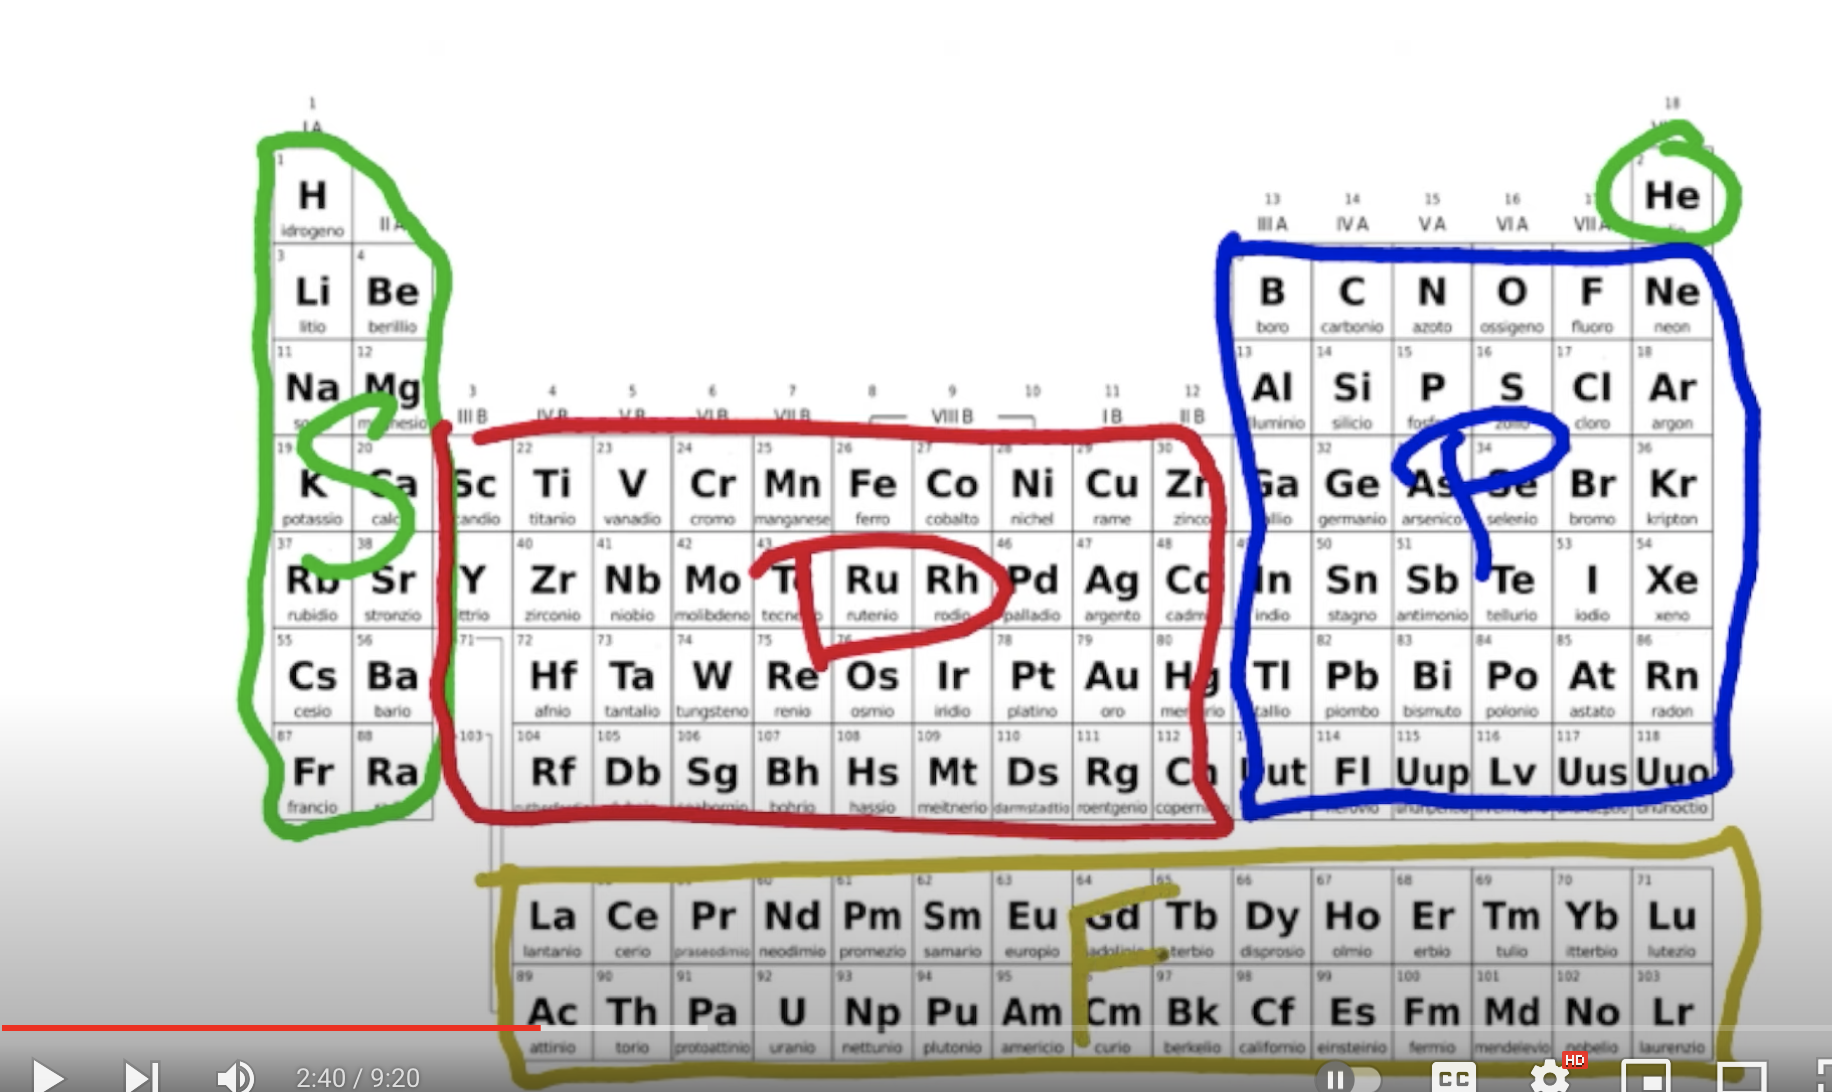 <ol><li><p>Find your element on the table (K = Potassium)</p></li><li><p>Go up one row and all the way to column 18 to find your noble gas and box it [Ar]</p></li><li><p>After your noble gas, continue the configuration until you reach your element</p><ul><li><p>continue config by adding each orbital for each element (K, after Ar, is s1) (you can know what sublevel is each element based on where it is on the periodic table)</p></li></ul></li></ol><p>a: <strong>[Ar] 4s1</strong></p>